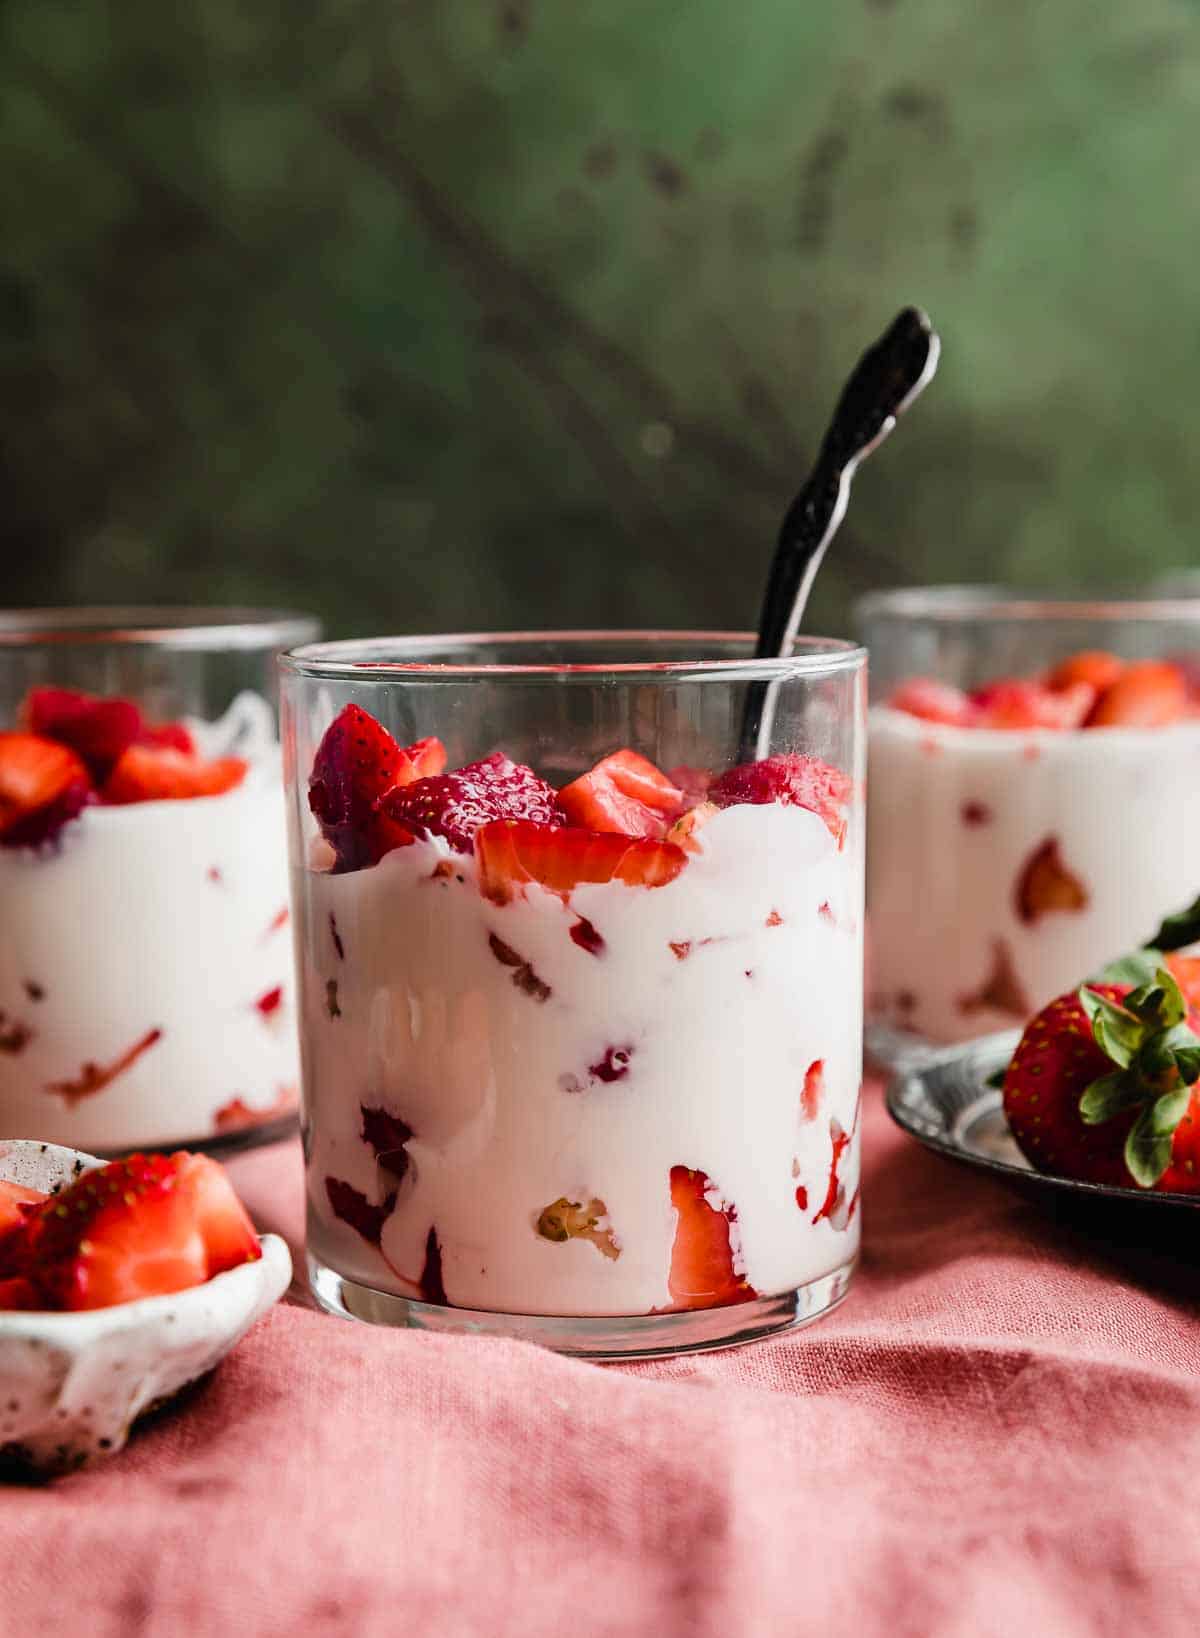 Three clear cups filled with Strawberries and Cream (Fresas con Crema) on a red linen cloth against a textured brown and green background.